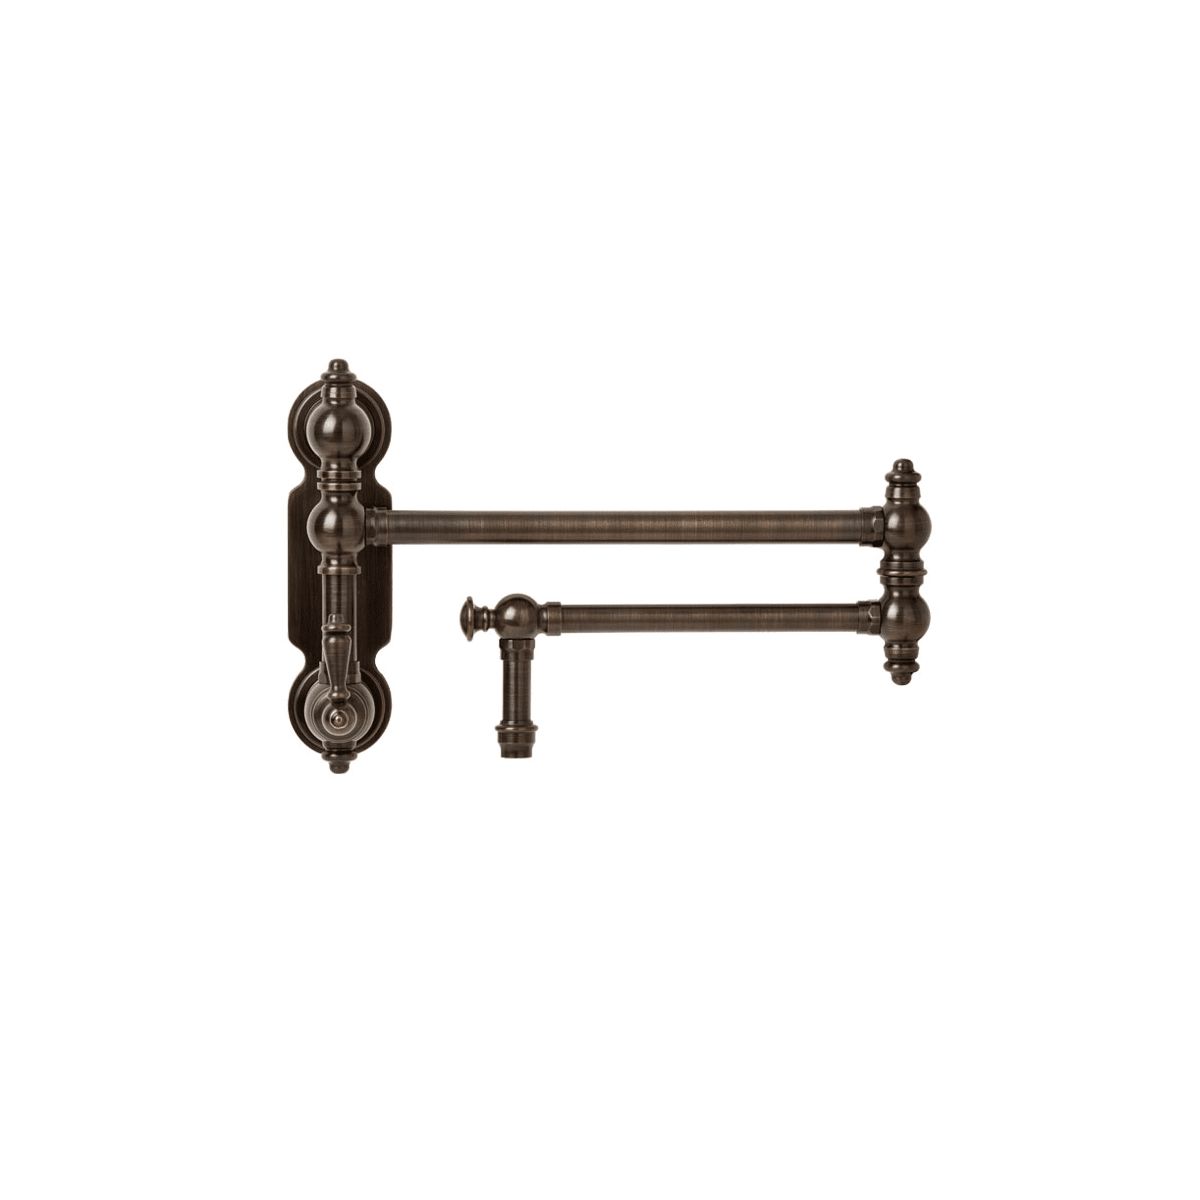 Traditional 1.75 GPM Wall Mounted Widespread Pot Filler Faucet | Build.com, Inc.